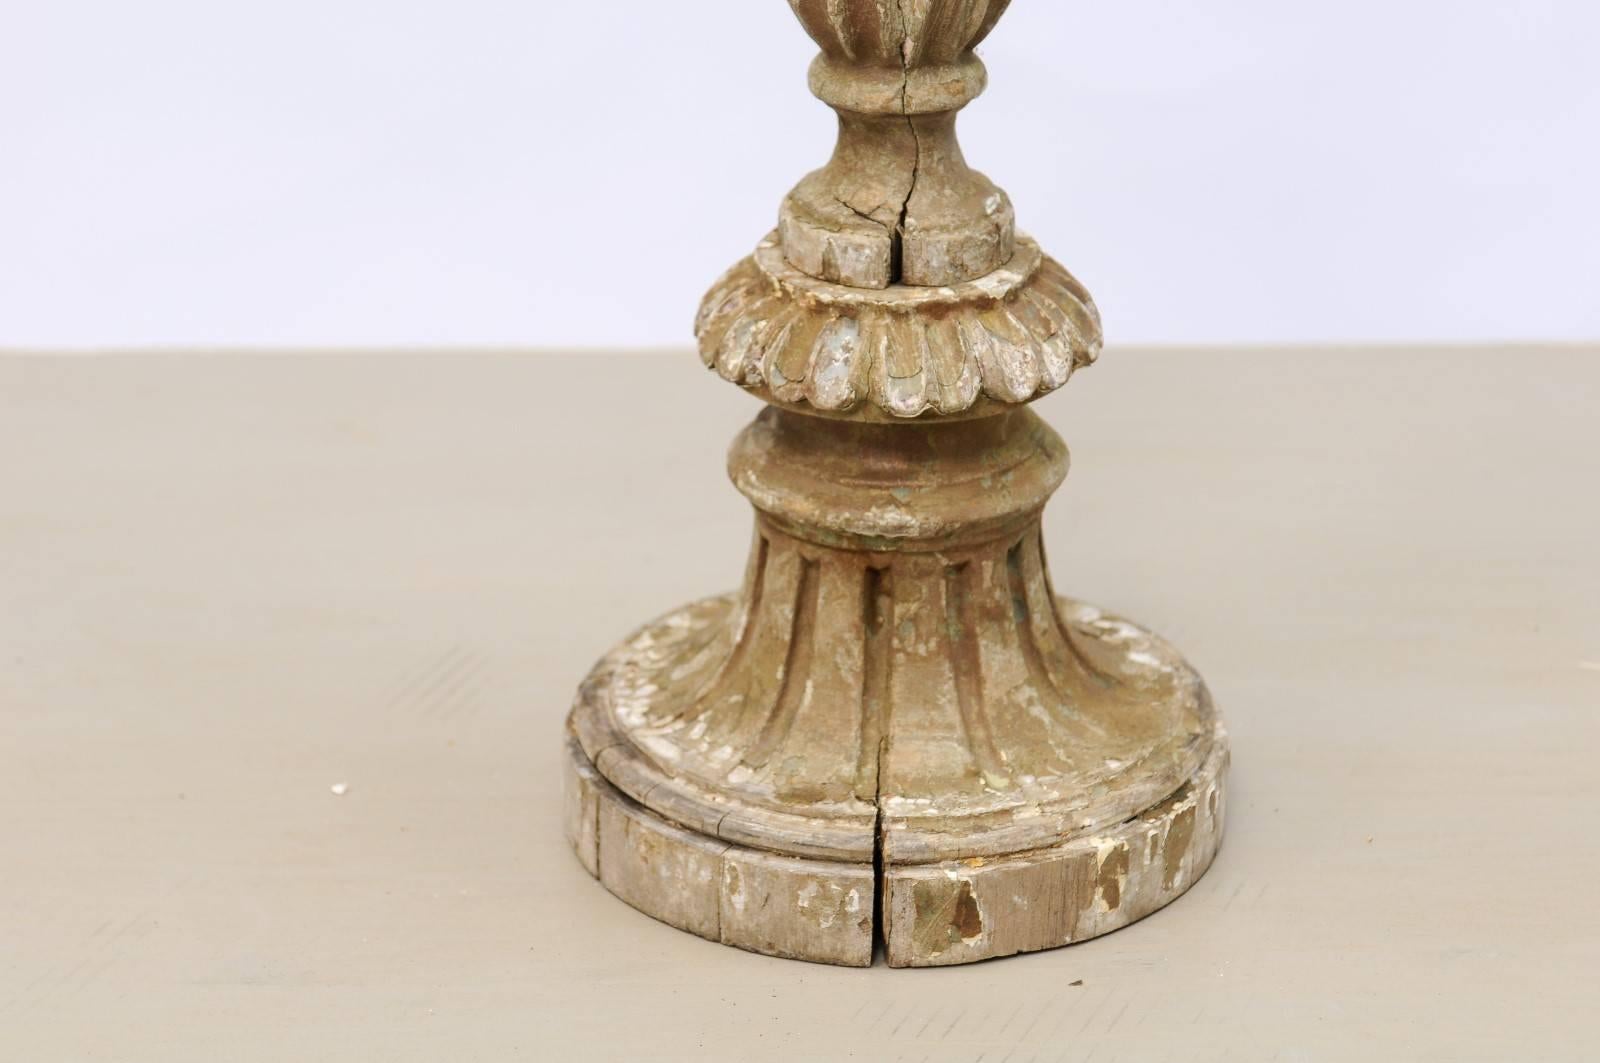 Wood 18th Century Portuguese Tall Carved Candlestick with Floral Motifs and Fluting